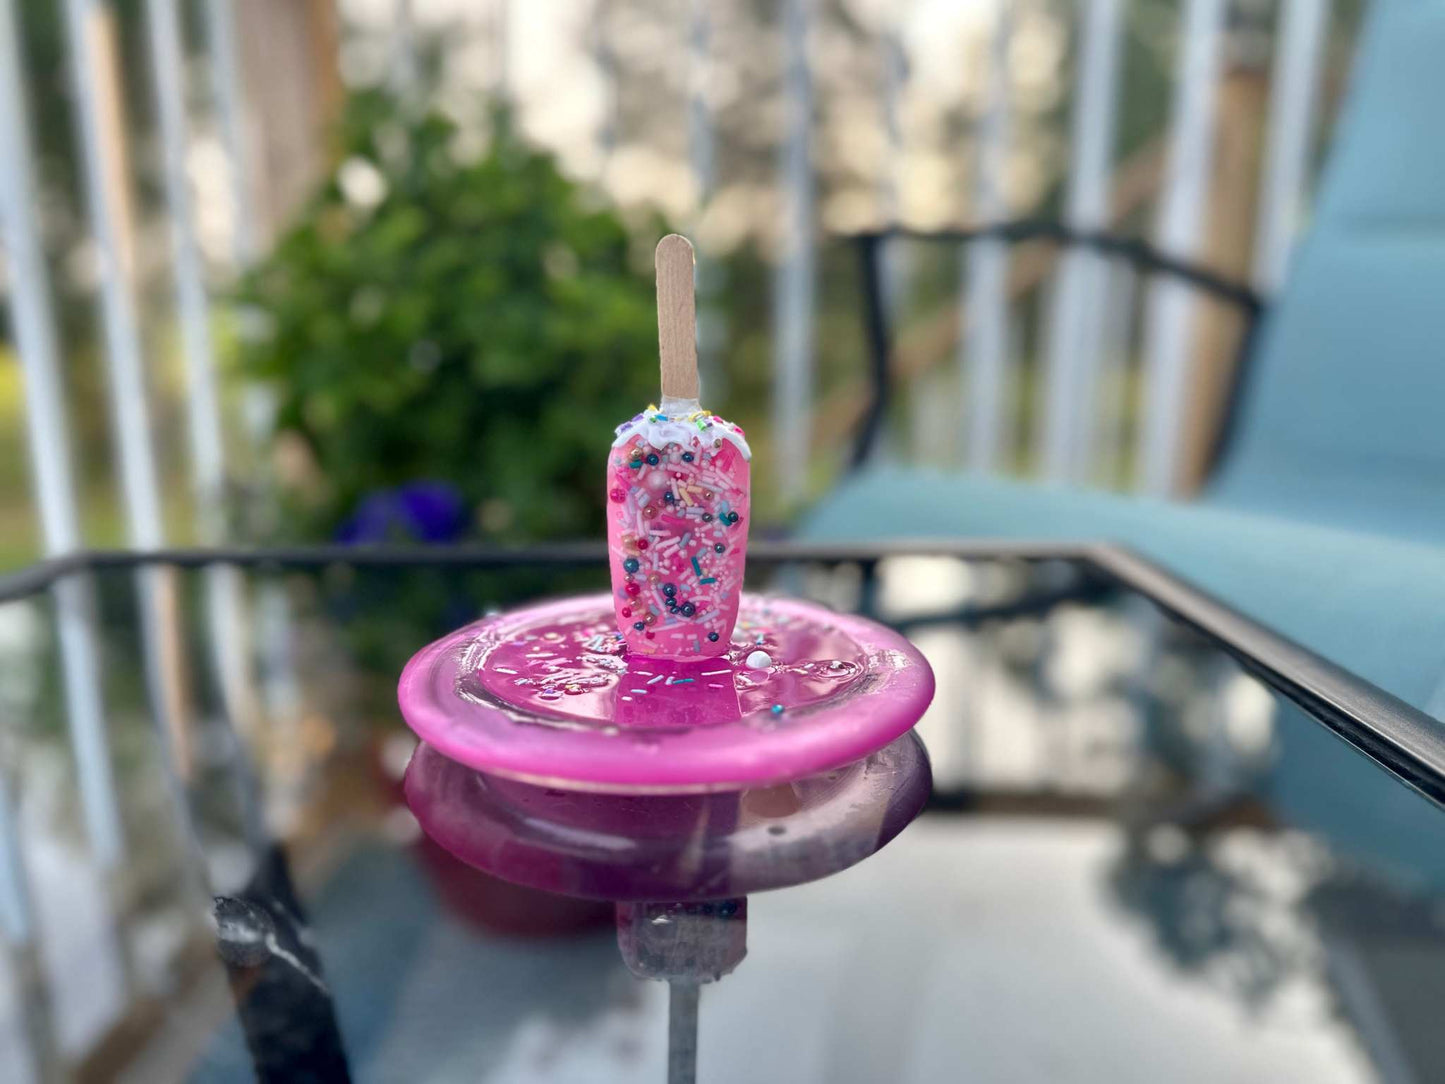 Popsicle Melting Pop Art Resin Sculpture Trinket Dish- Pretty in PinkA pink resin melting popsicle pop art sitting in a pink glass dish